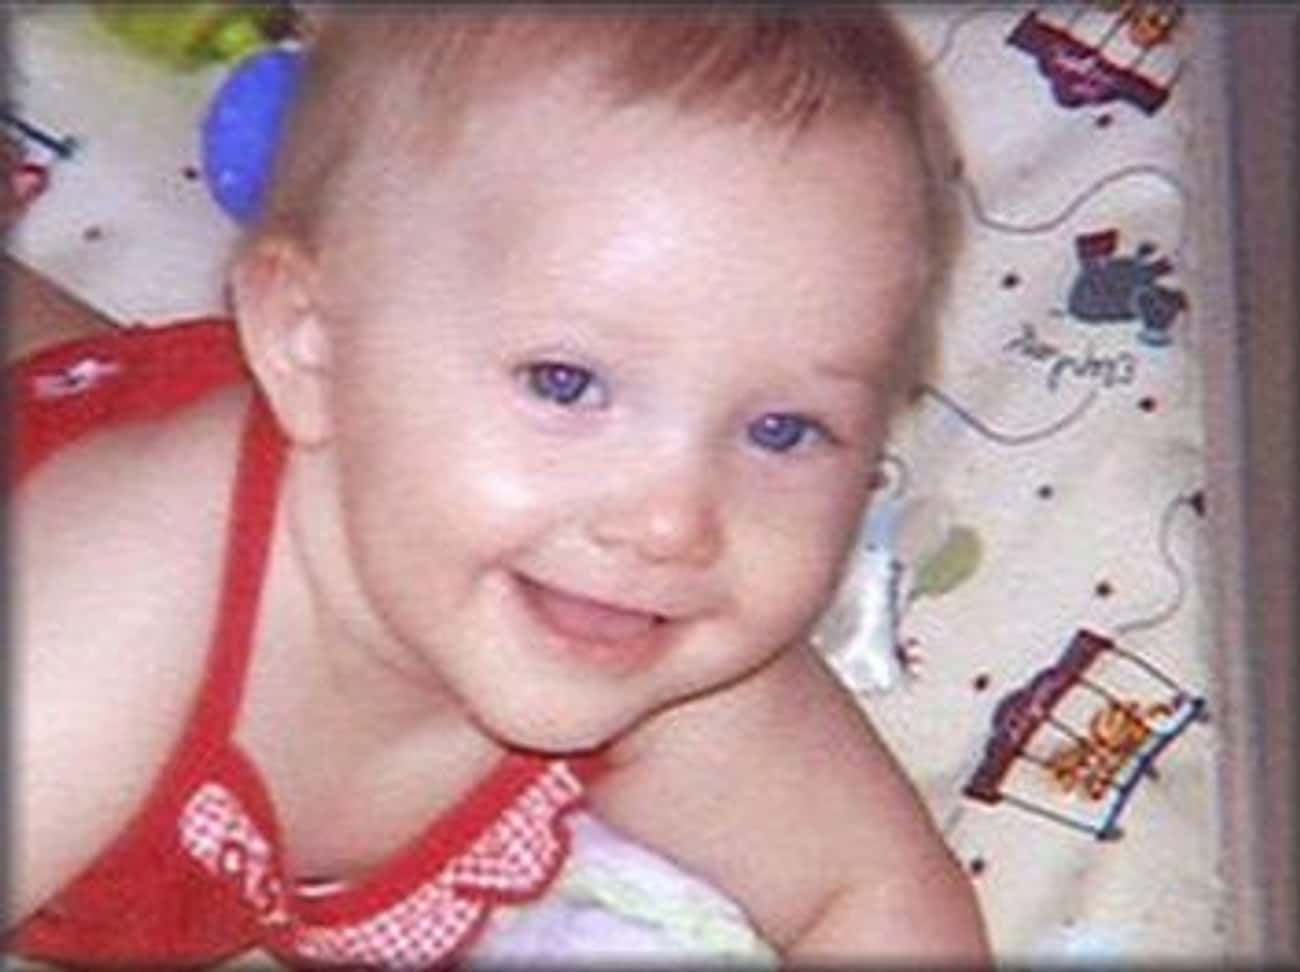 Infant Amora Bain Carson Was Beaten to Death During an Exorcism